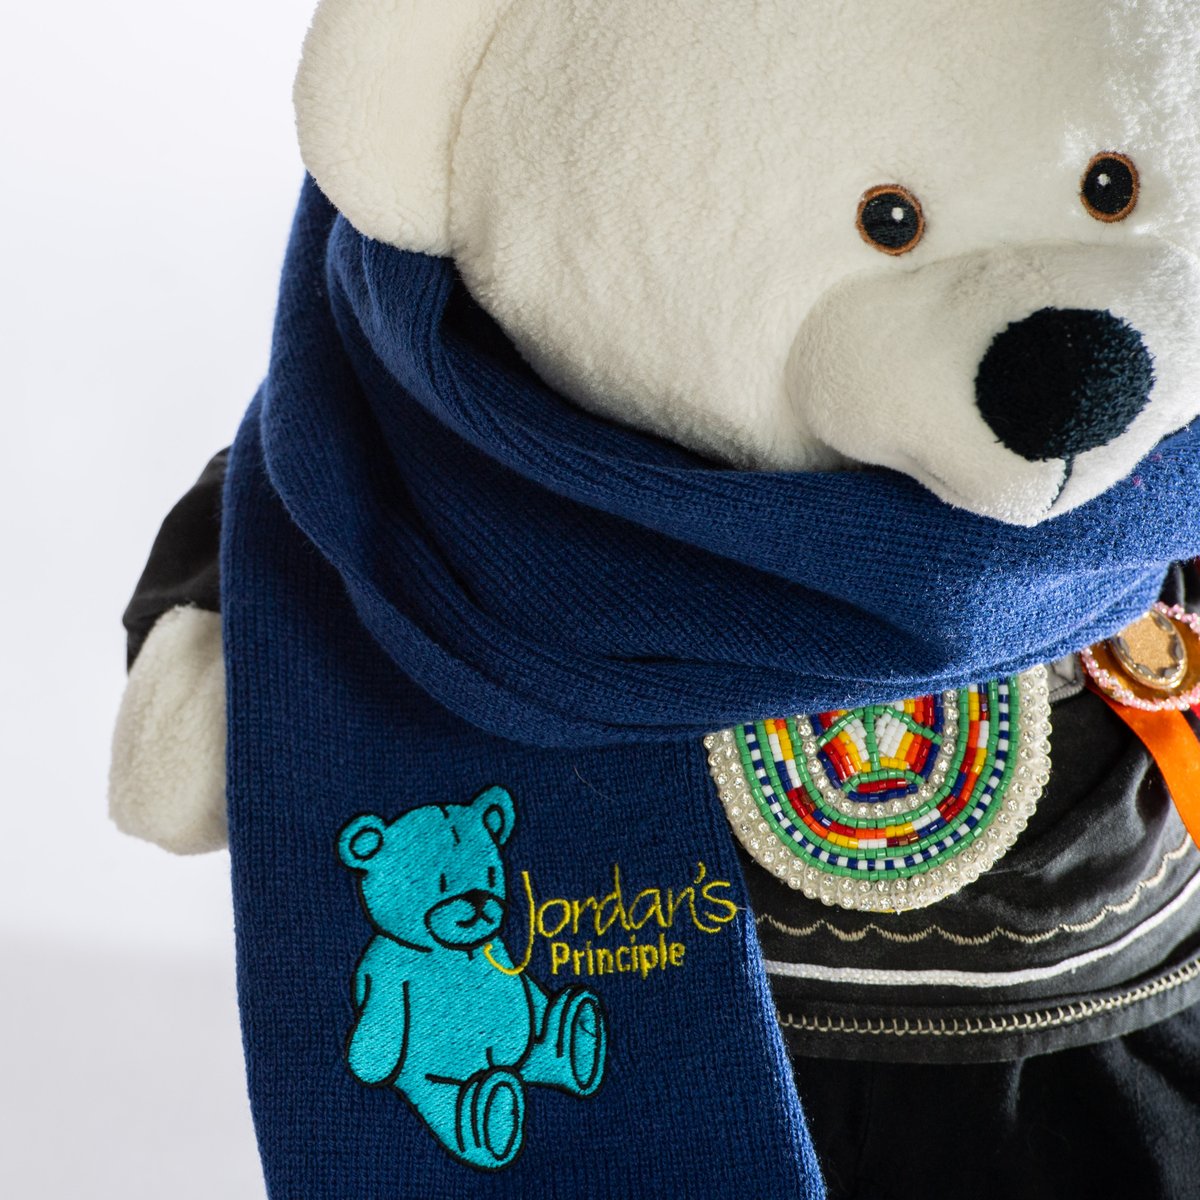 One month until #BearWitnessDay - an important date in the ongoing case for First Nations kids at the Canadian Human Rights Tribunal. Get up to speed on the significance behind May 10 by visiting fncaringsociety.com/bear-witness-d…